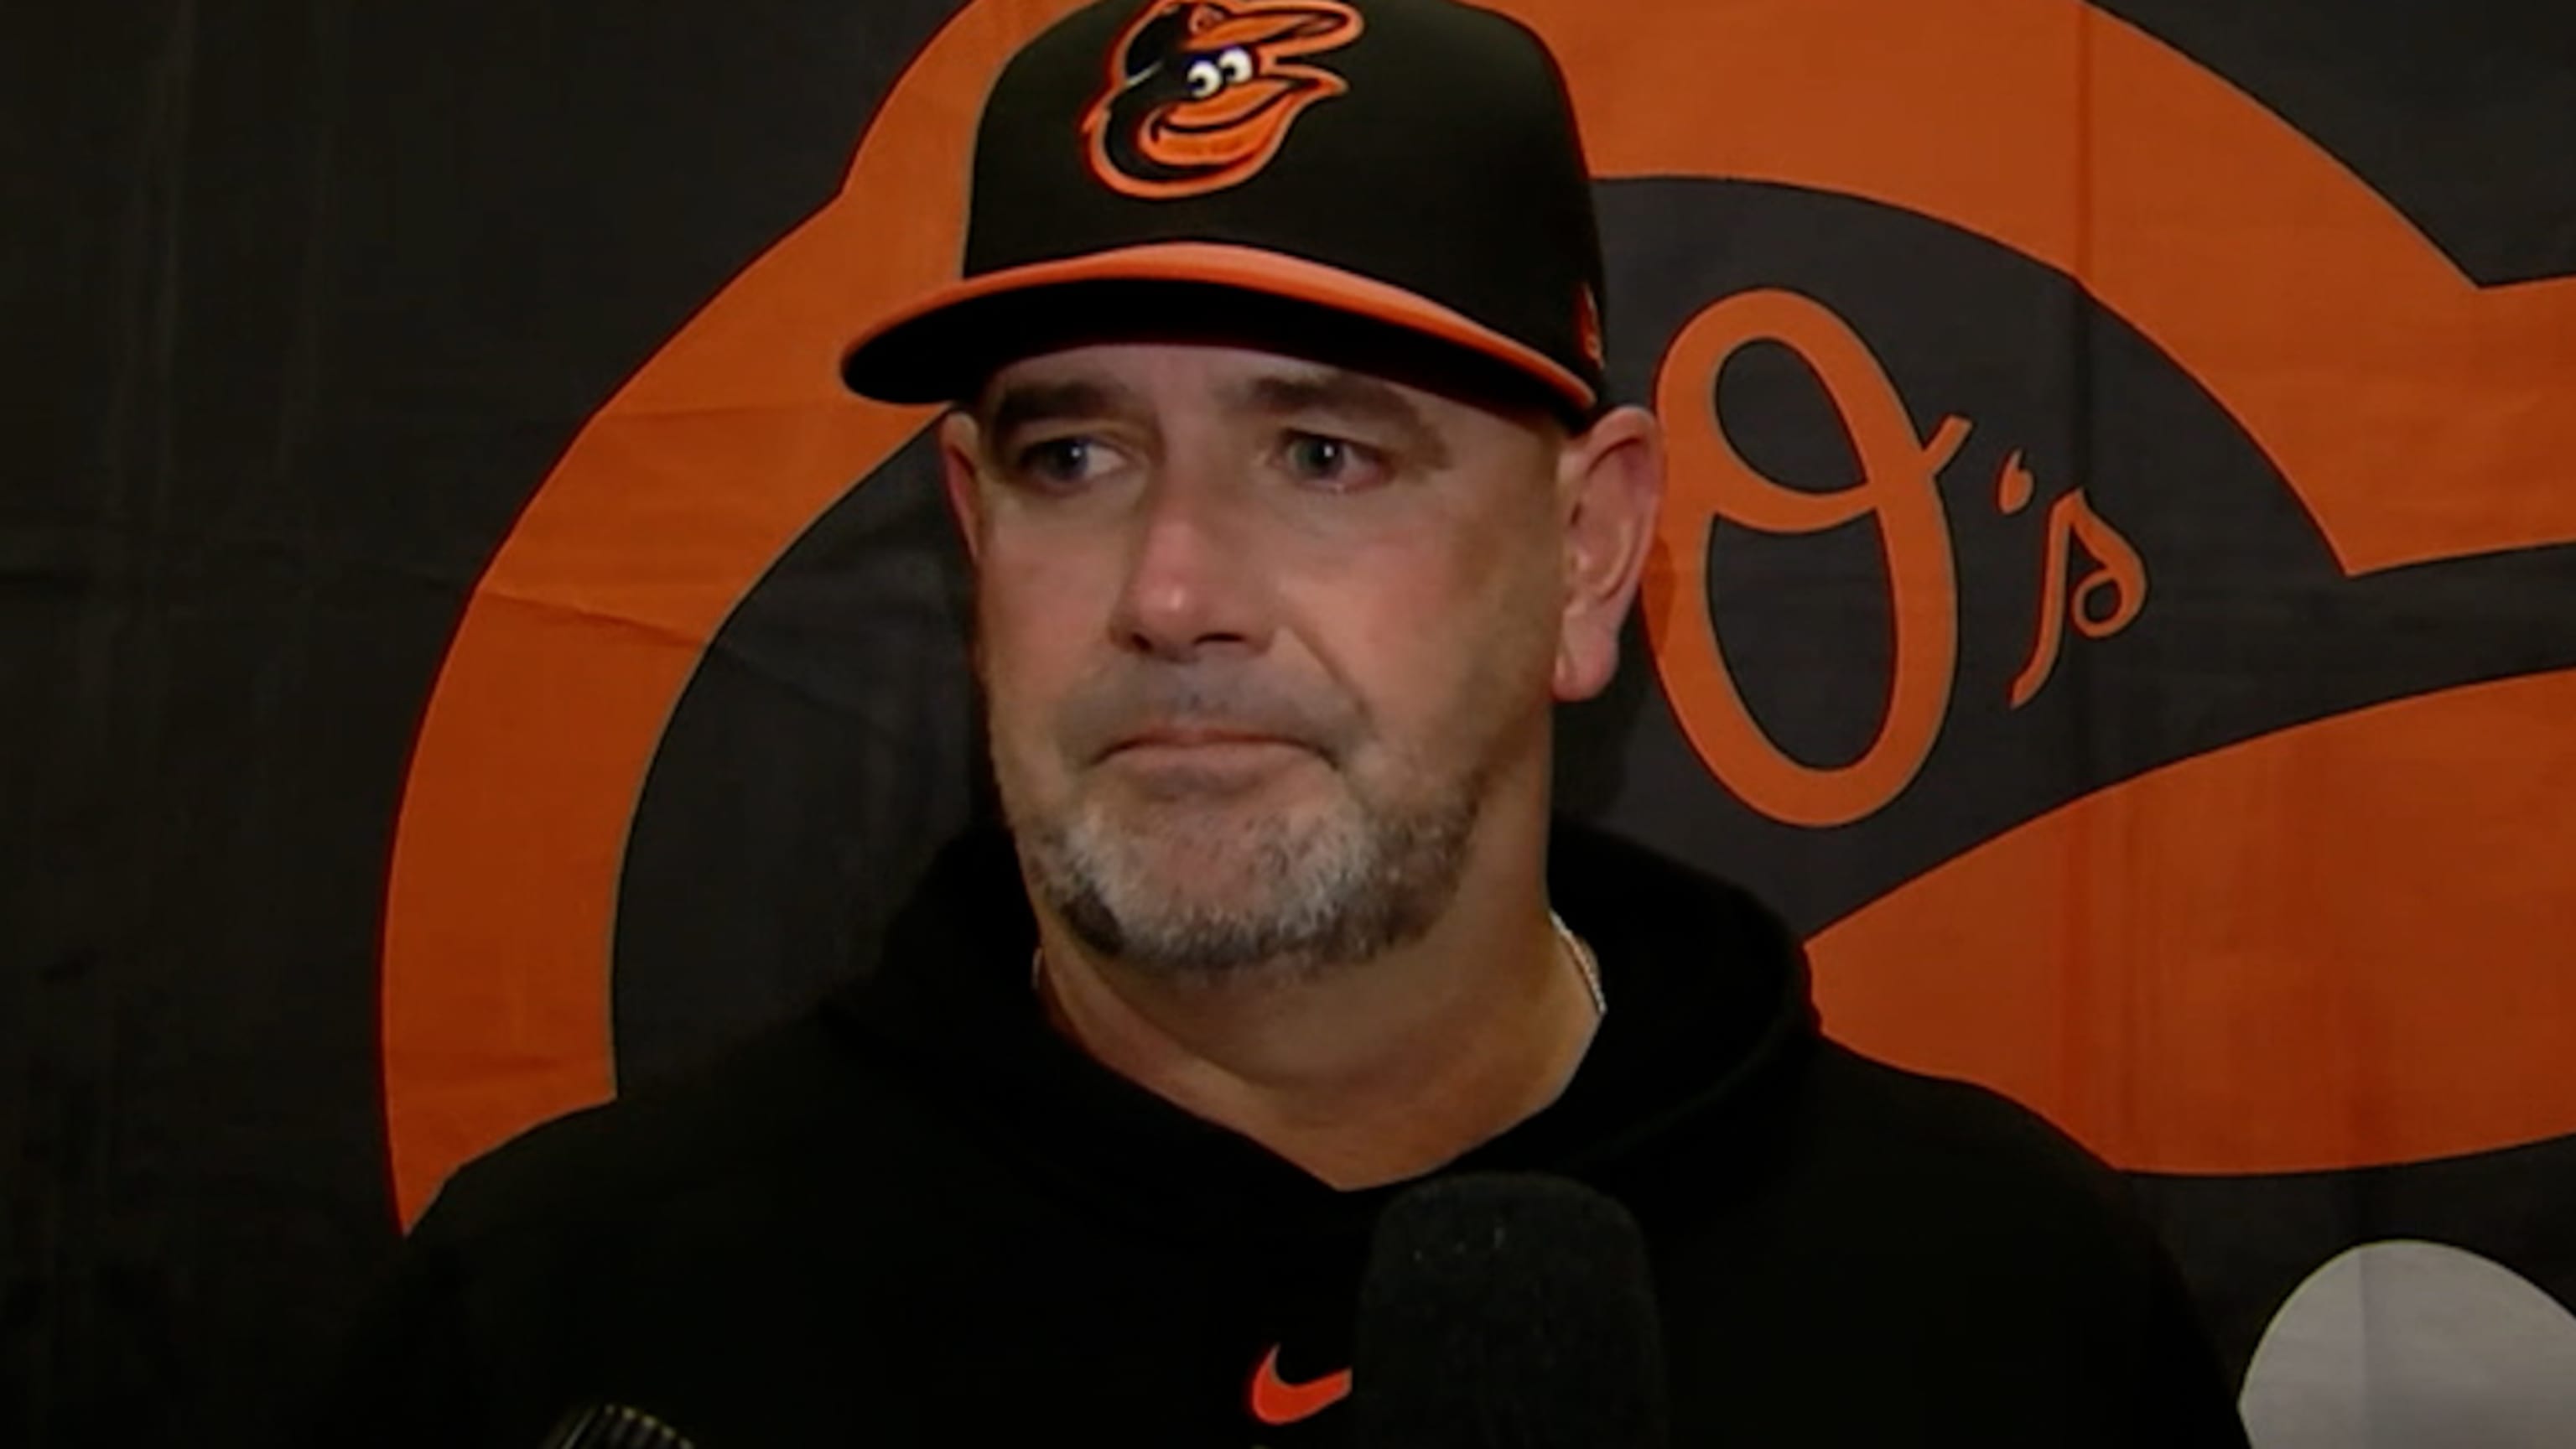 Hyde gets 1st win as manager, Orioles beat Yankees 5-3